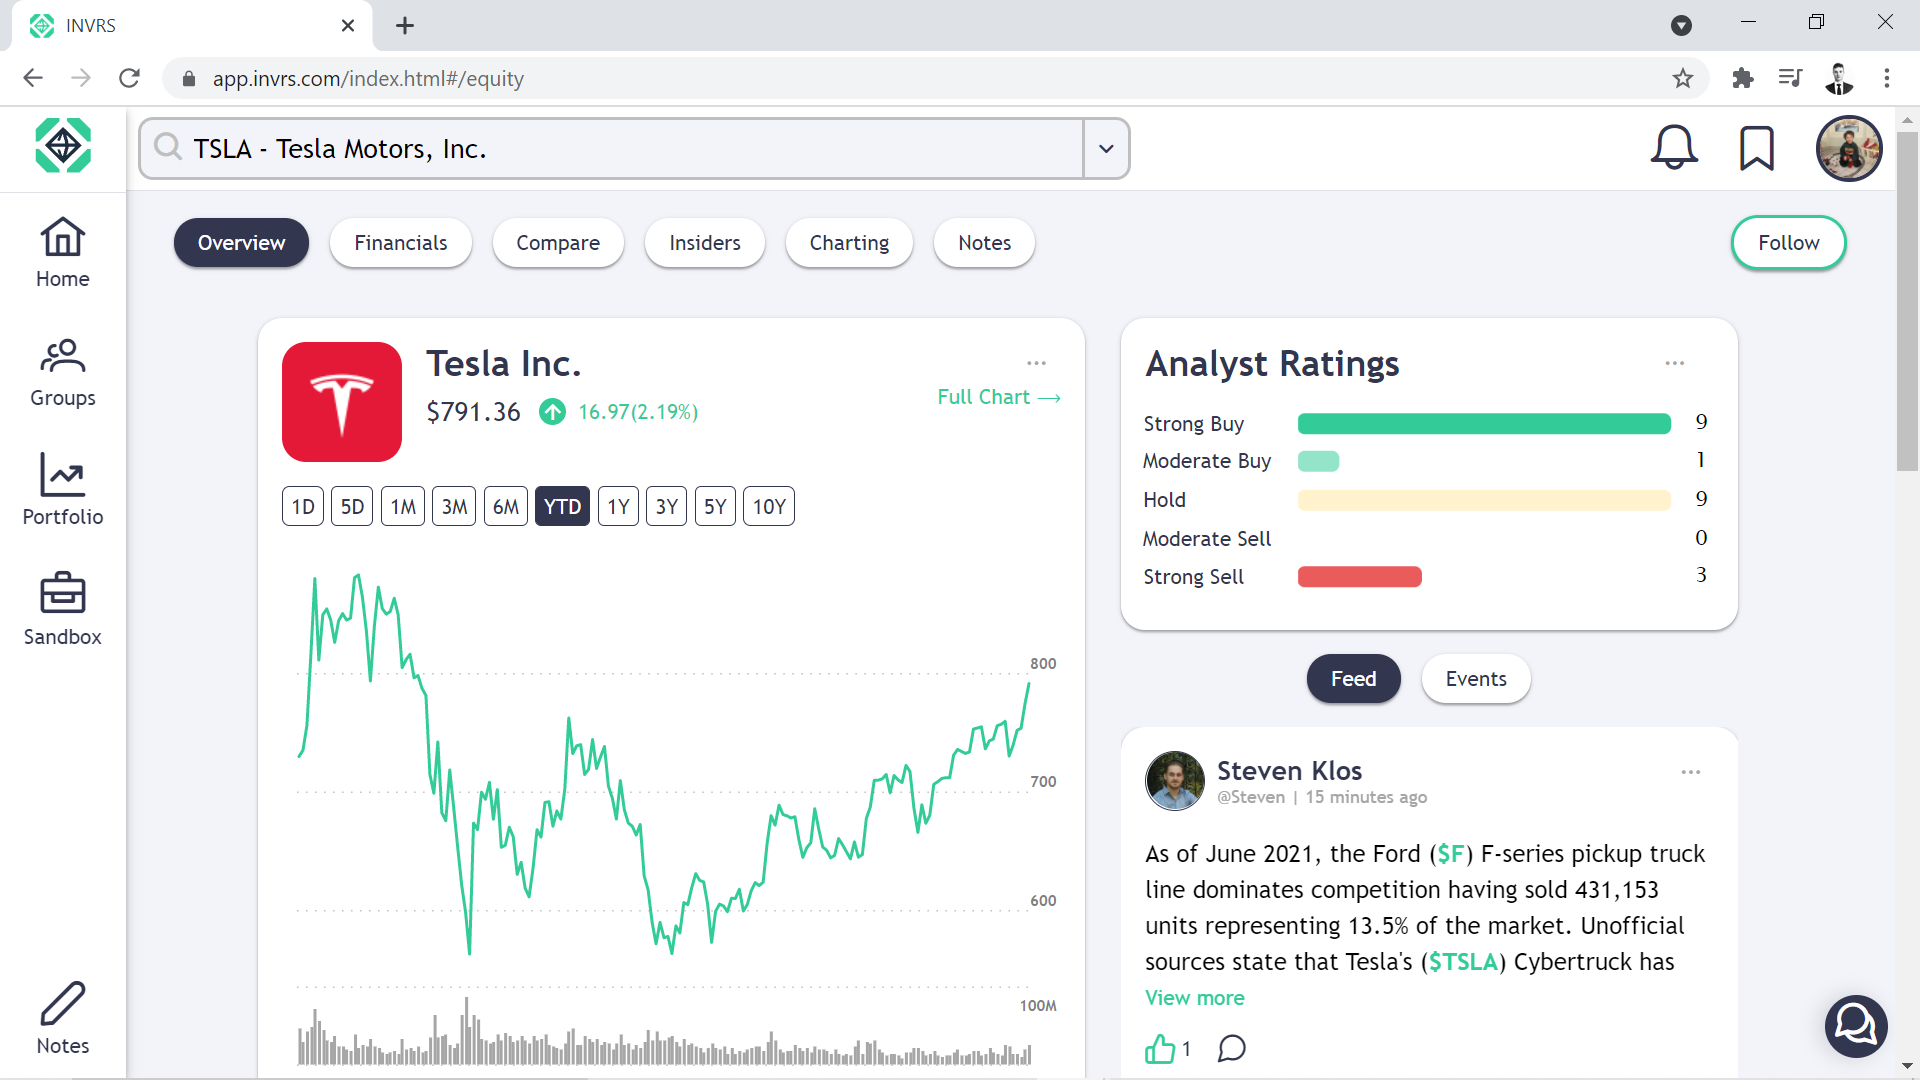 INVRS overview page on Tesla stock, showing some of the many analysis capabilities as well as users discussing the company's outlook